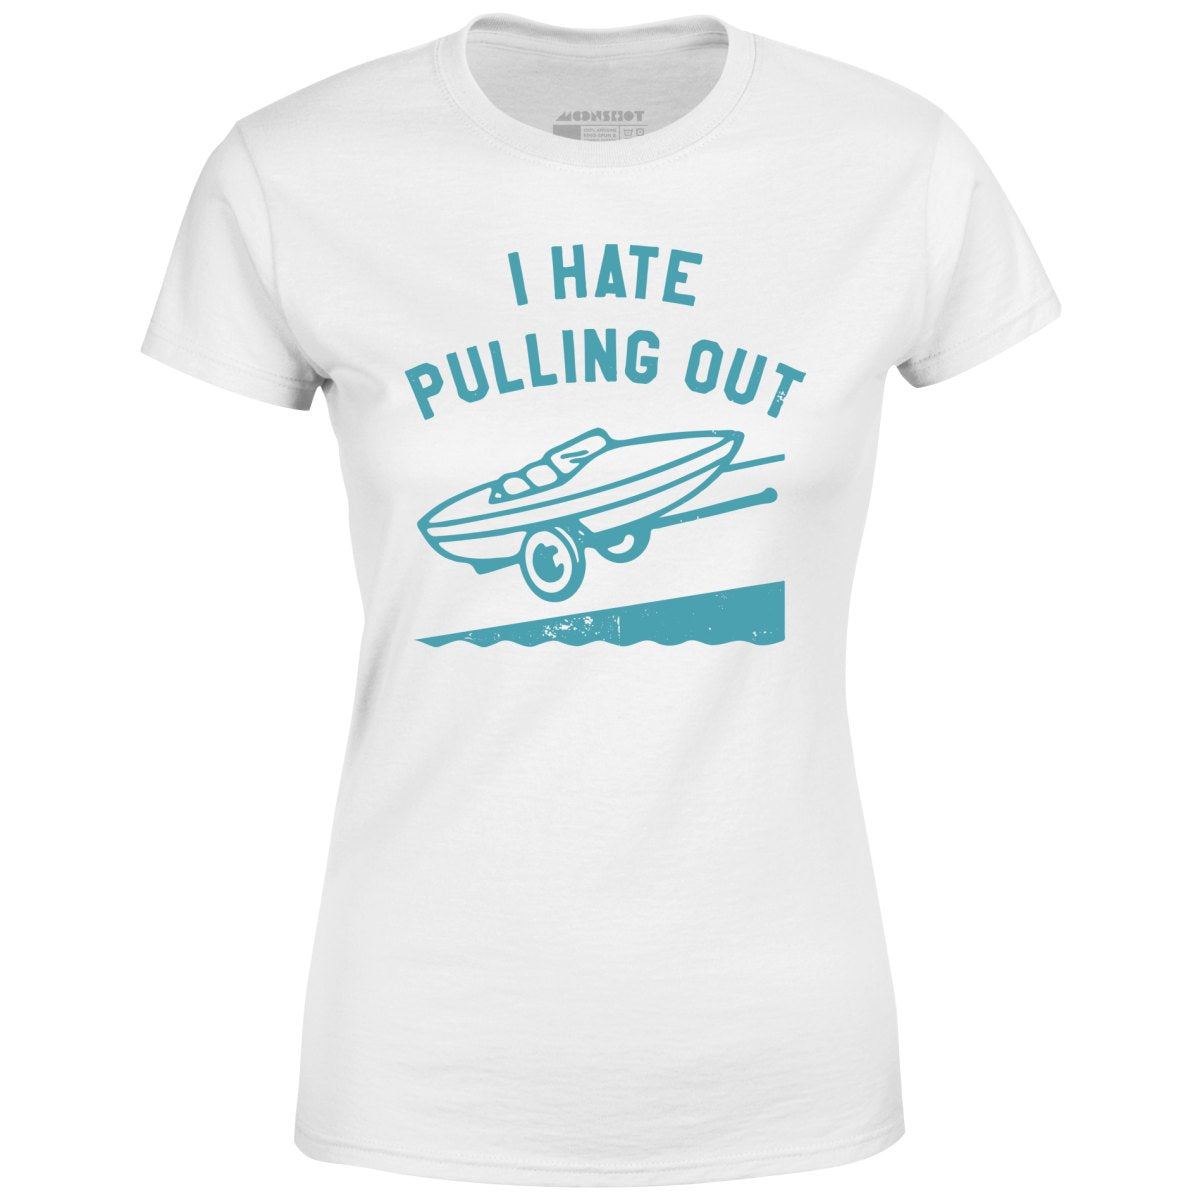 I Hate Pulling Out - Women's T-Shirt